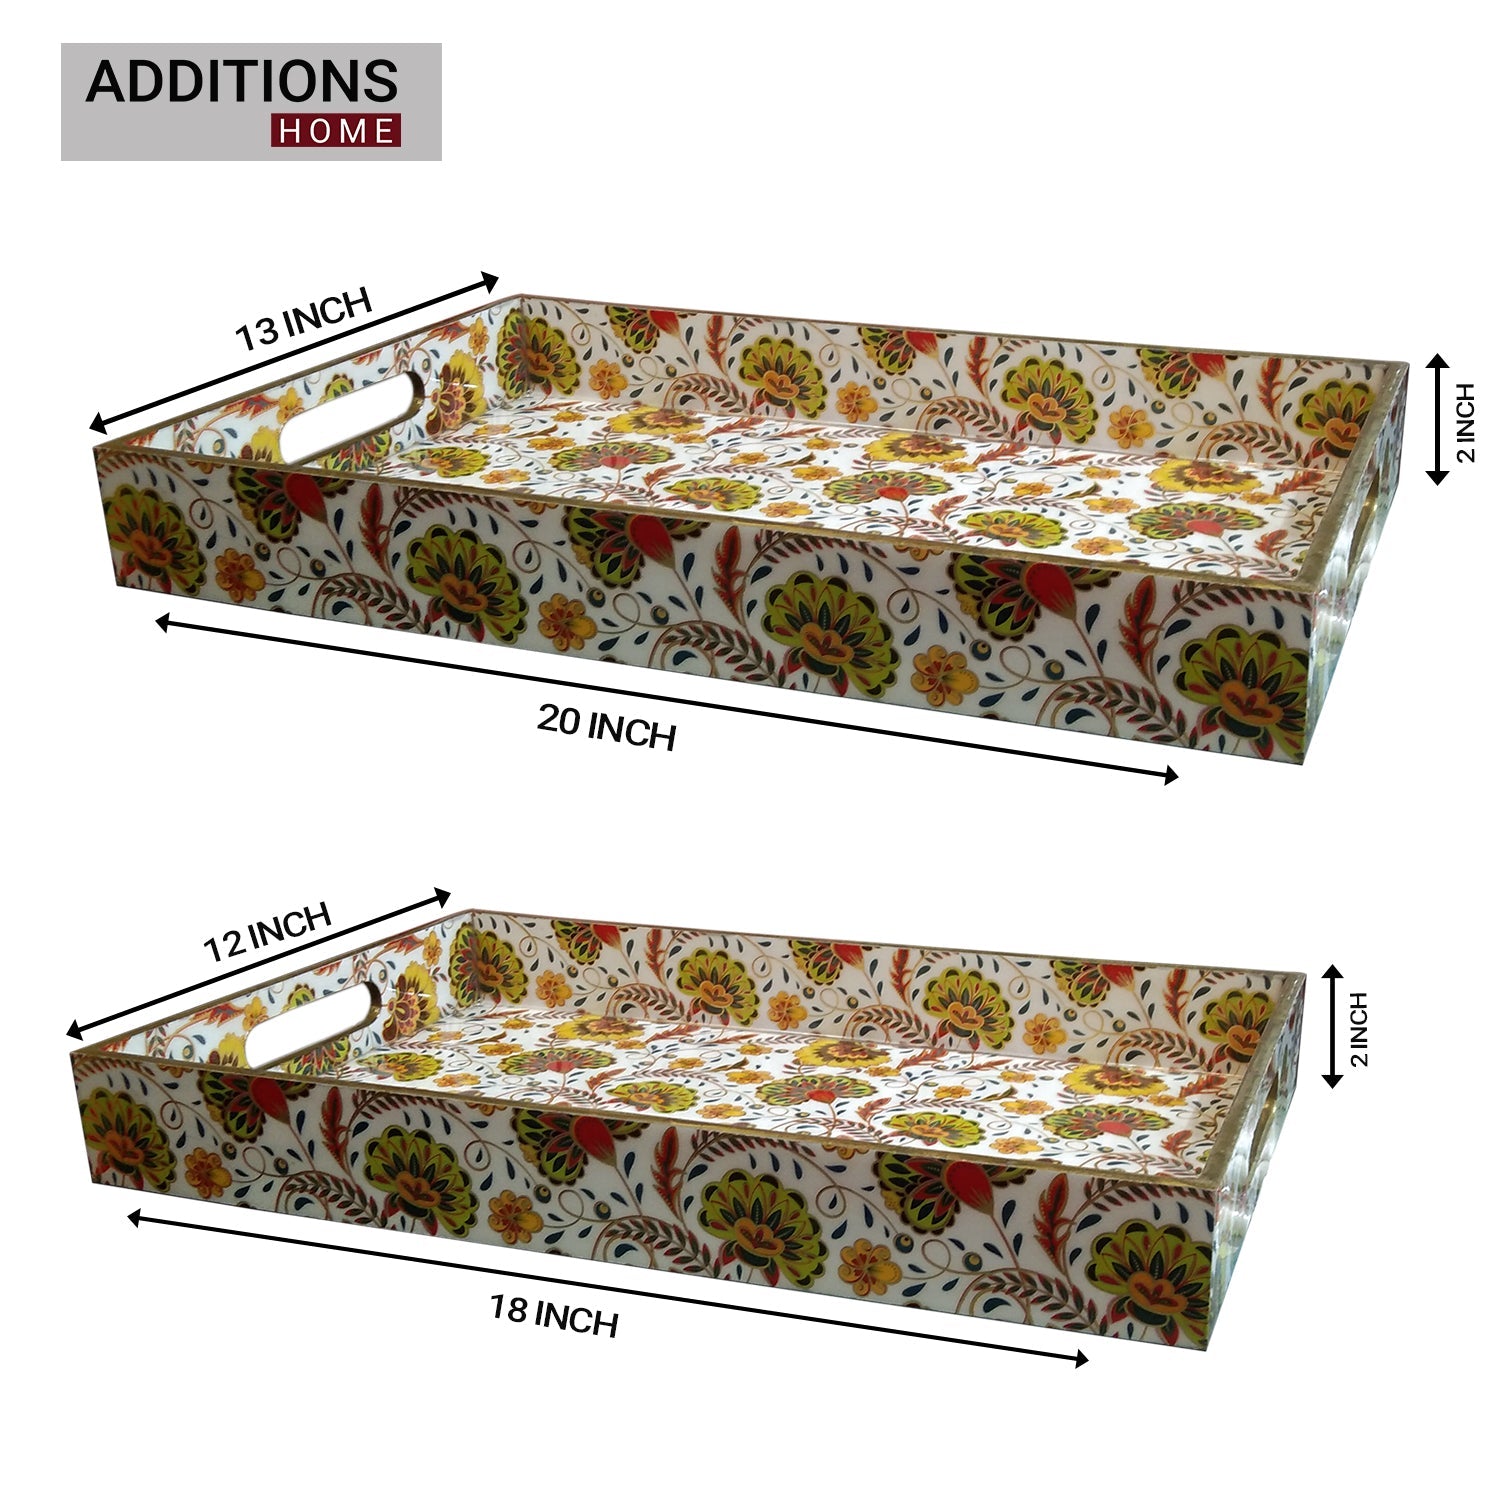 Lacquer Printed Wooden Food and Beverages Serving Tray for Home, Office, Kitchen & Dinning 2 Set